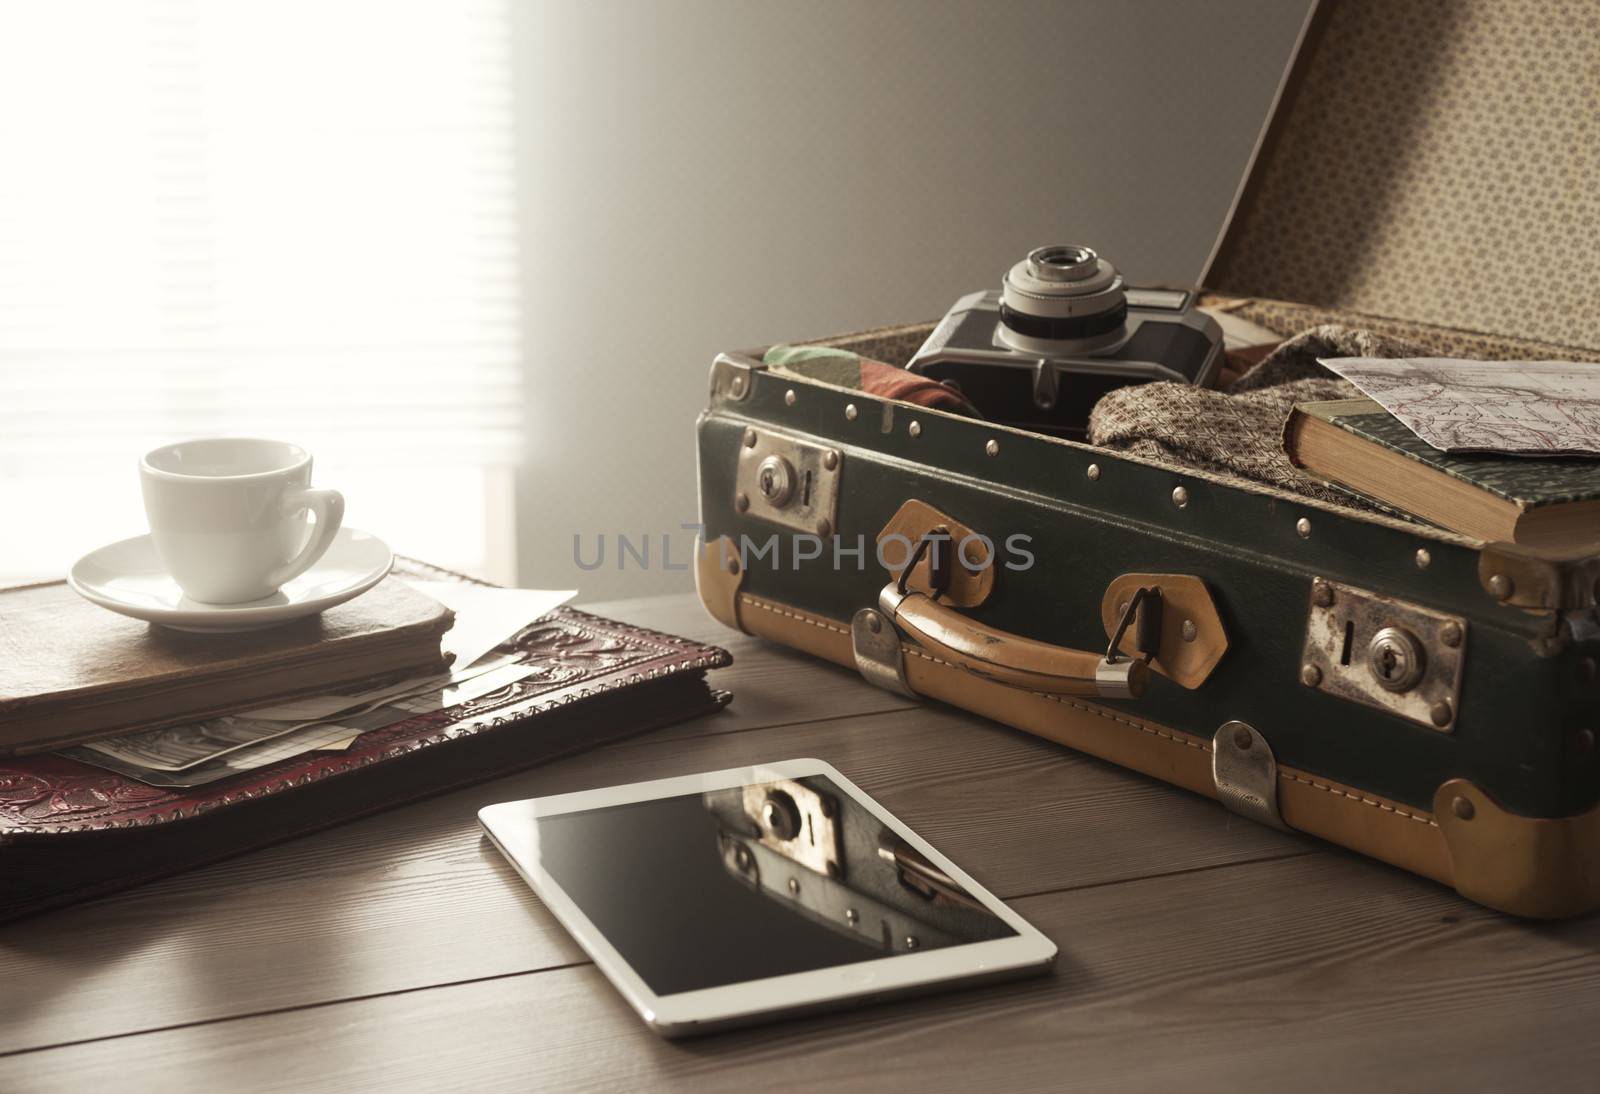 Traveler's suitcase with vintage items, tablet and a cup of coffee.